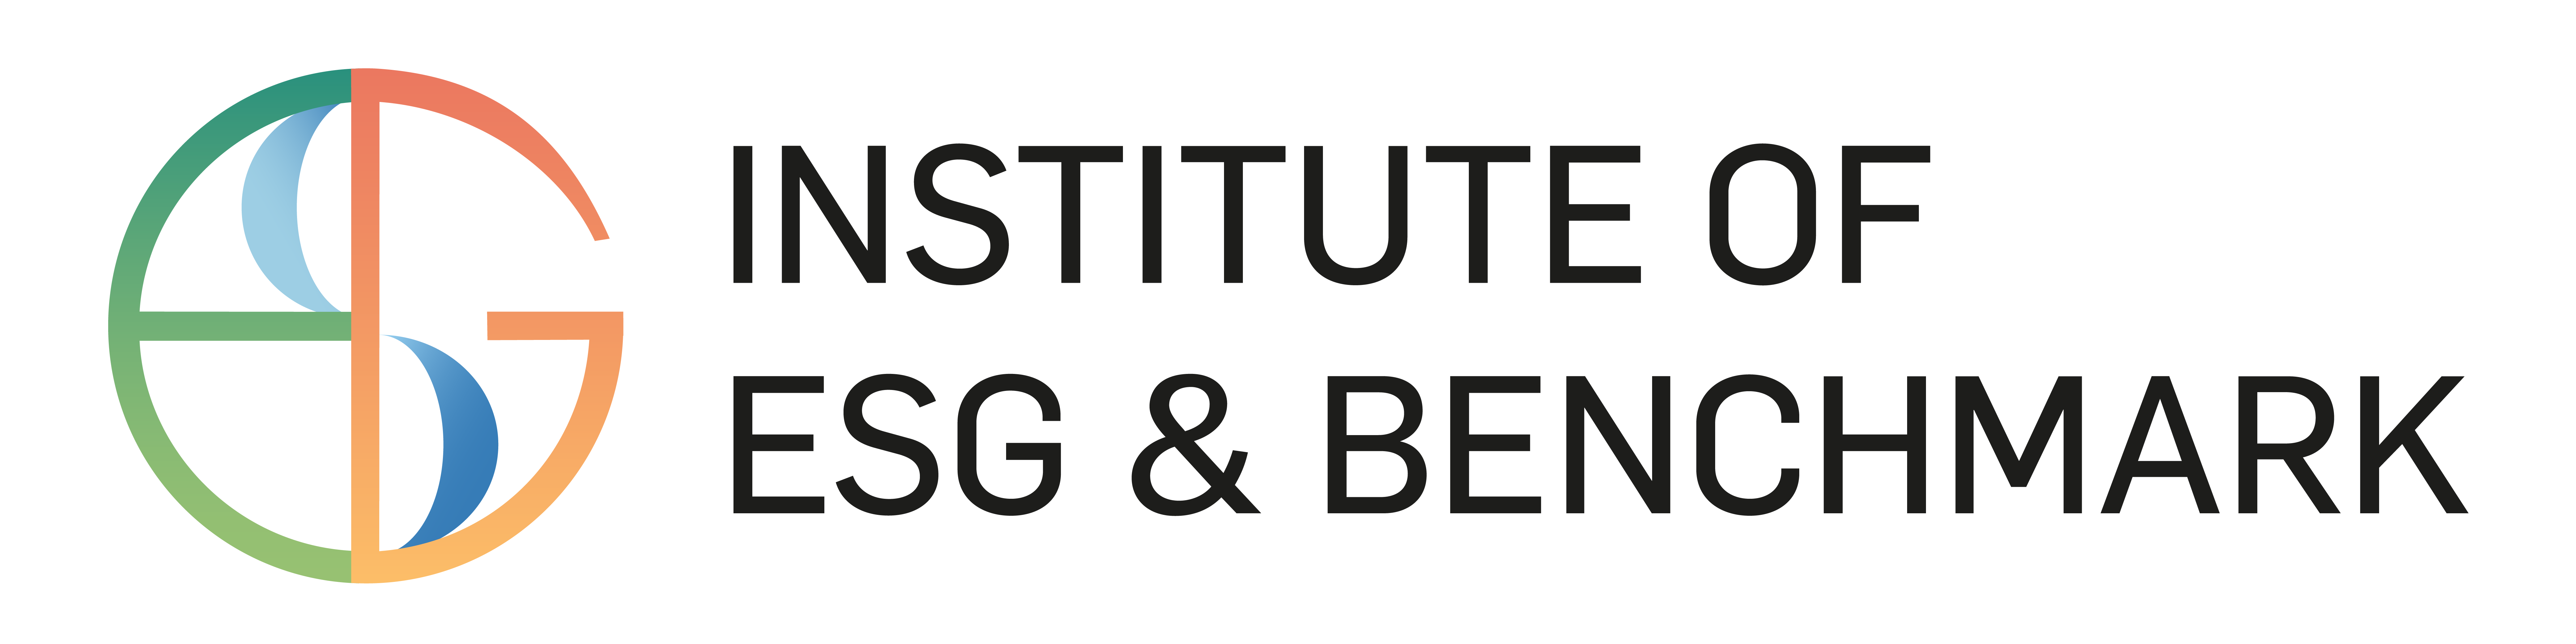 The Institute of ESG & Benchmark Limited